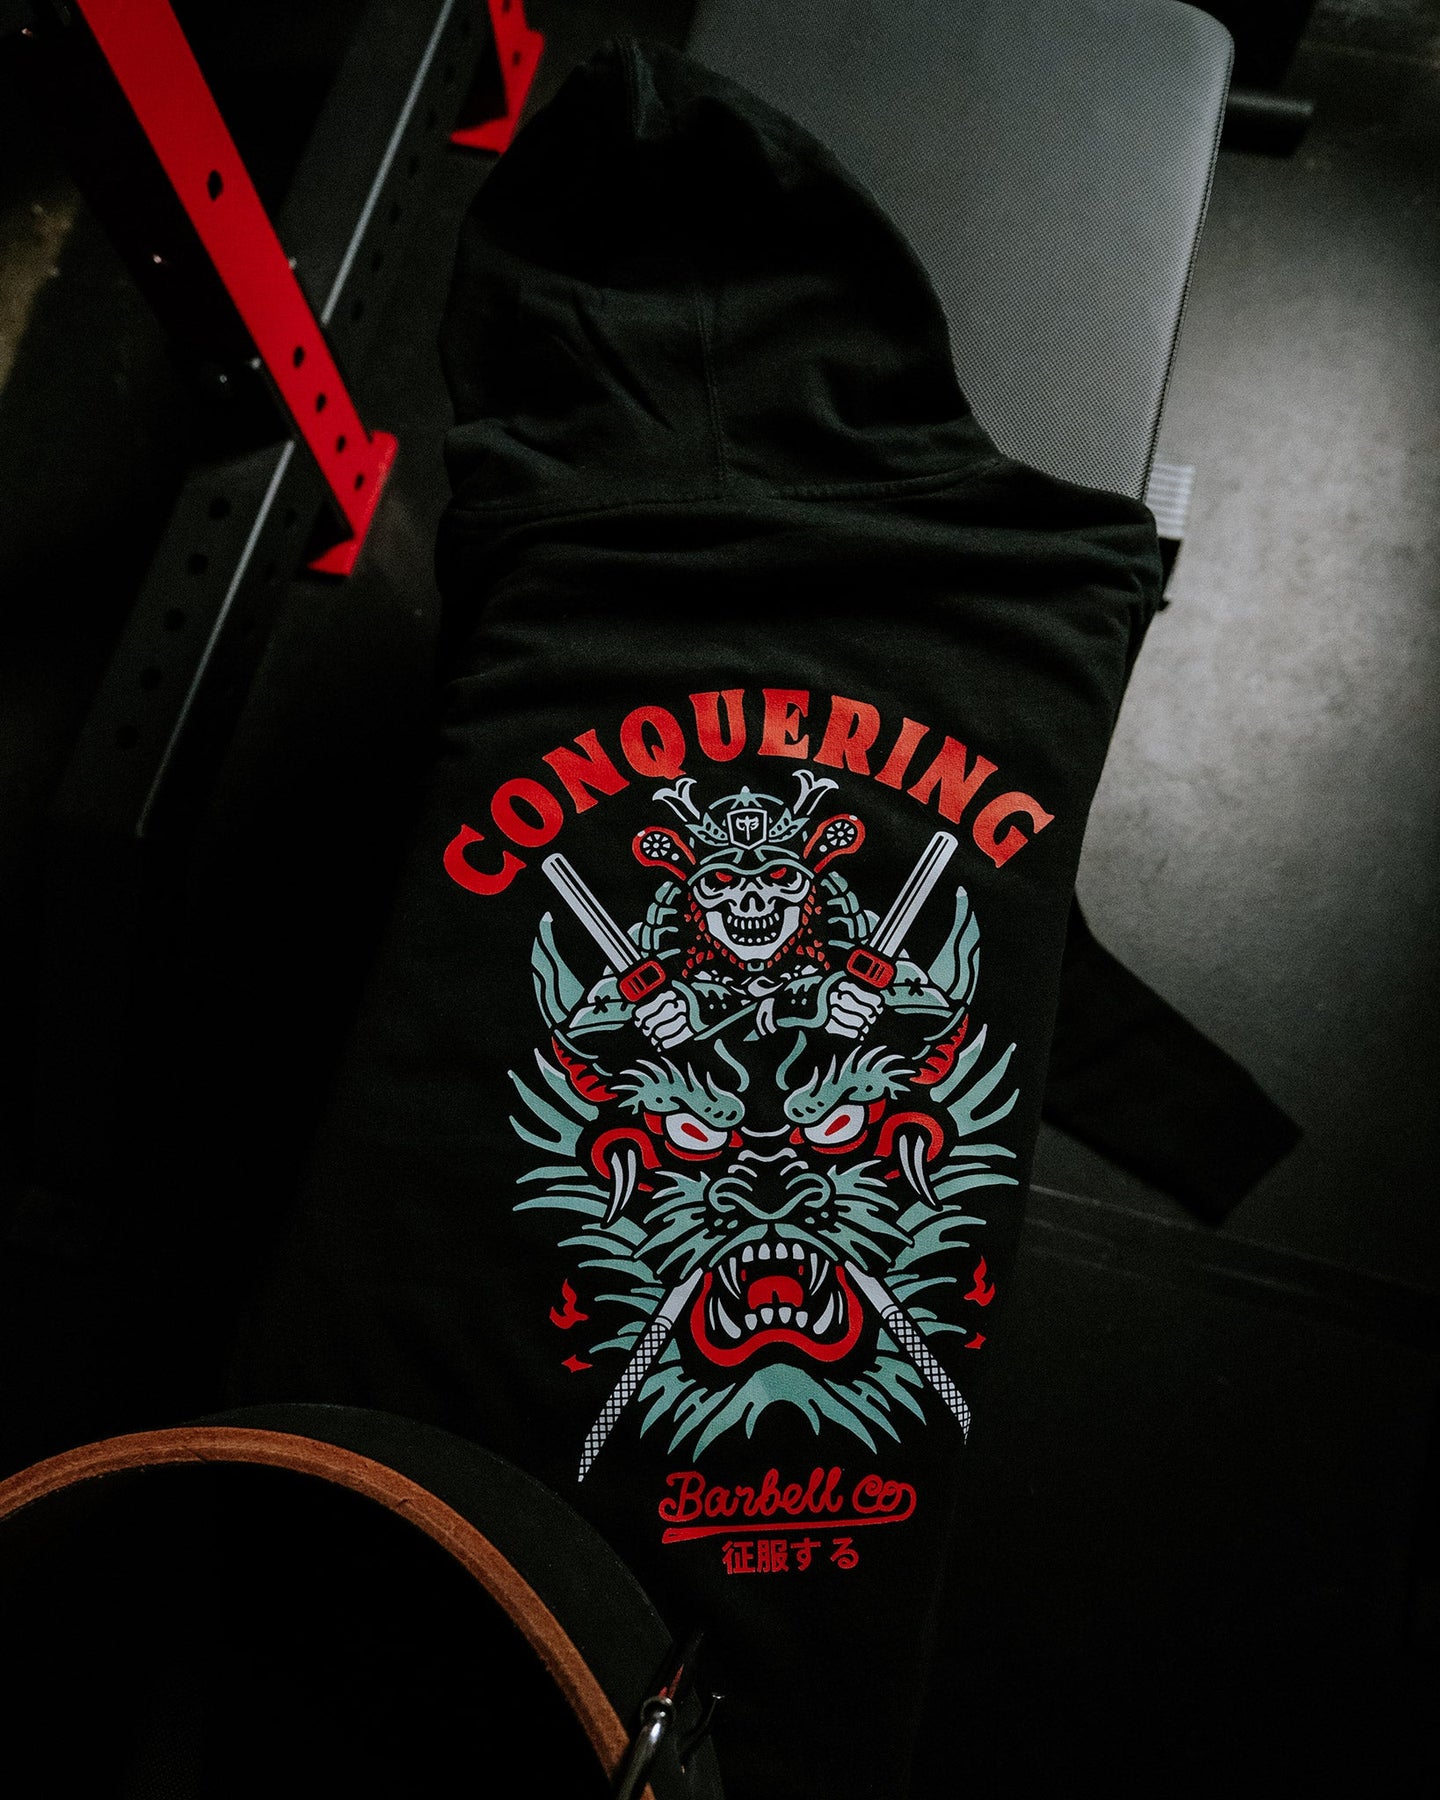 Conquer - Samurai - on Black Pullover Hoodie - Conquering Barbell